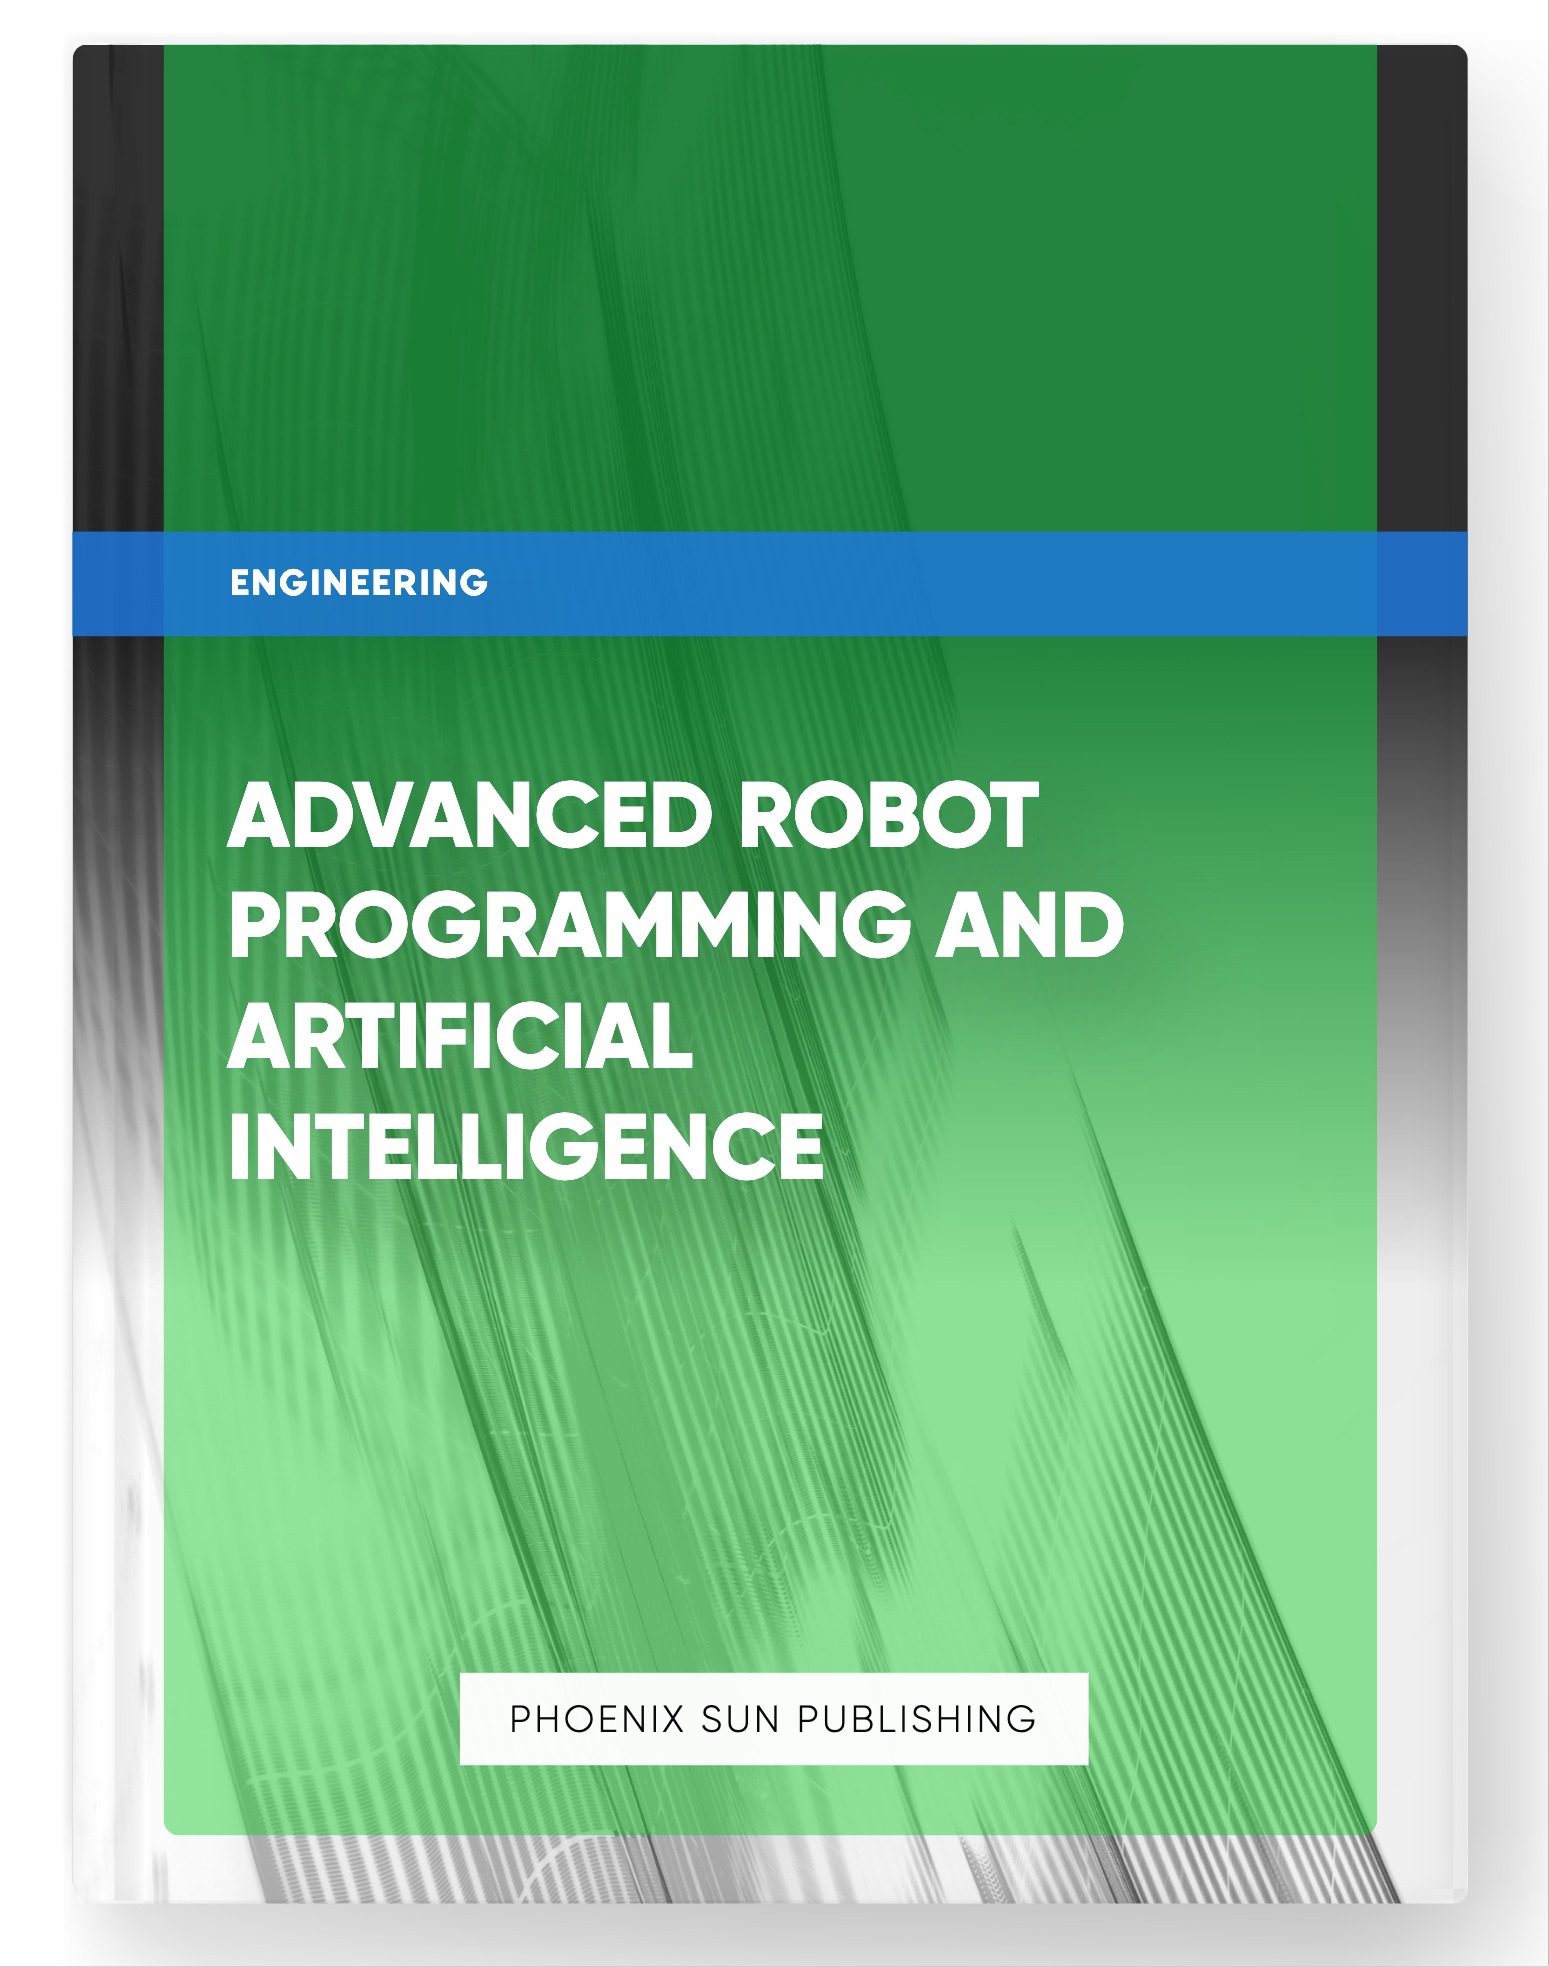 Advanced Robot Programming and Artificial Intelligence